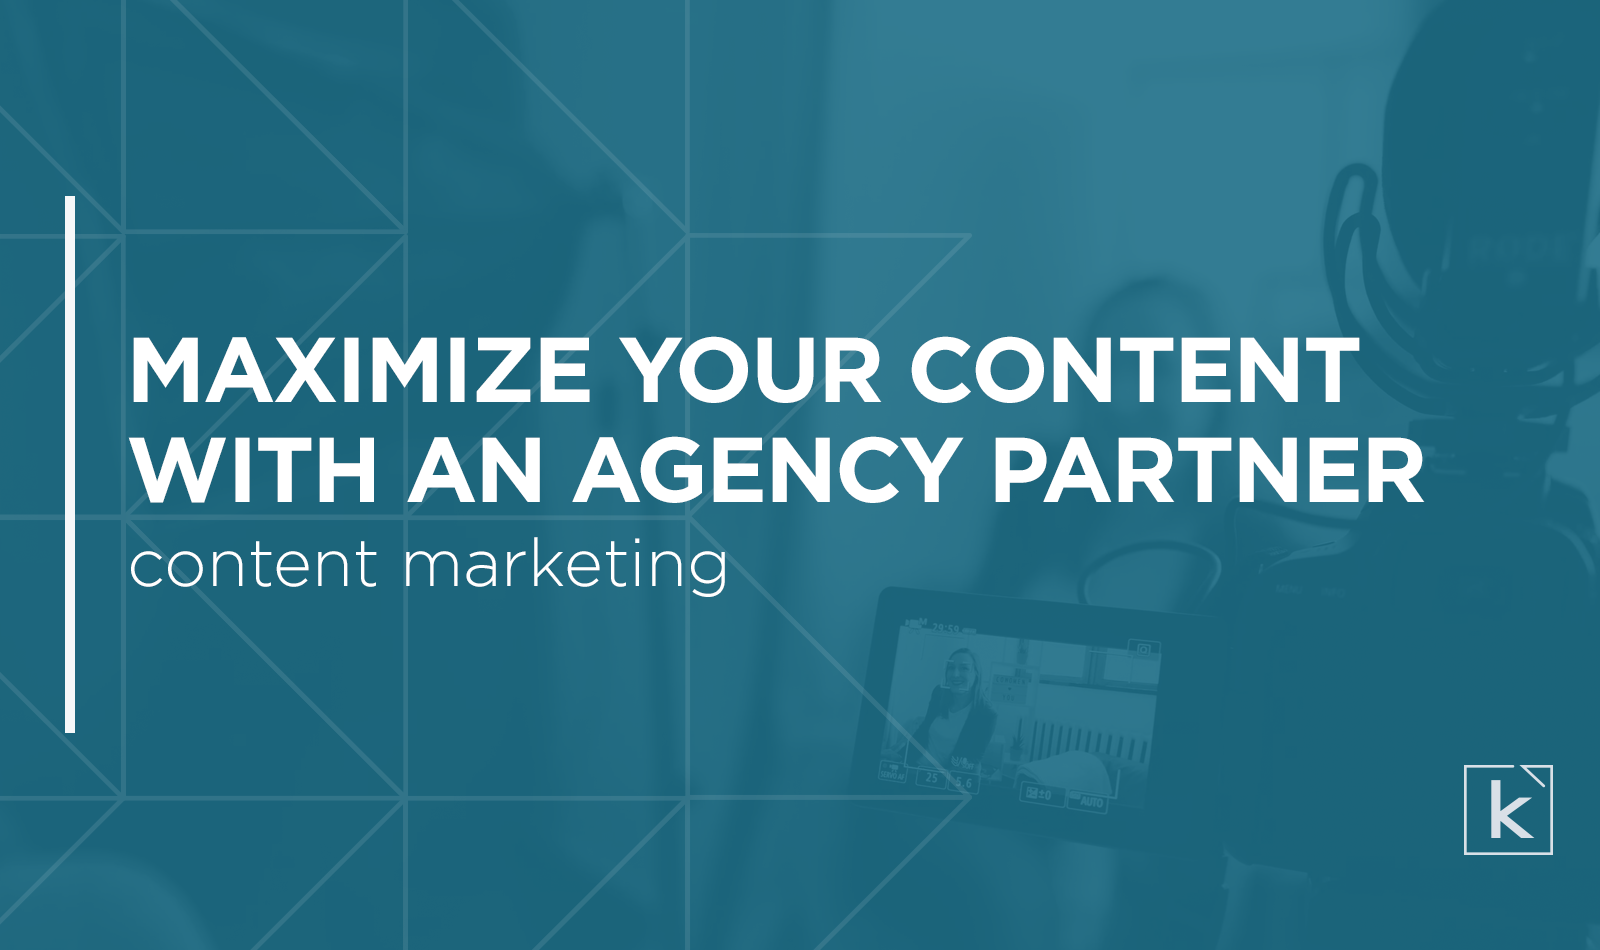 maximize-your-content-agency-partner